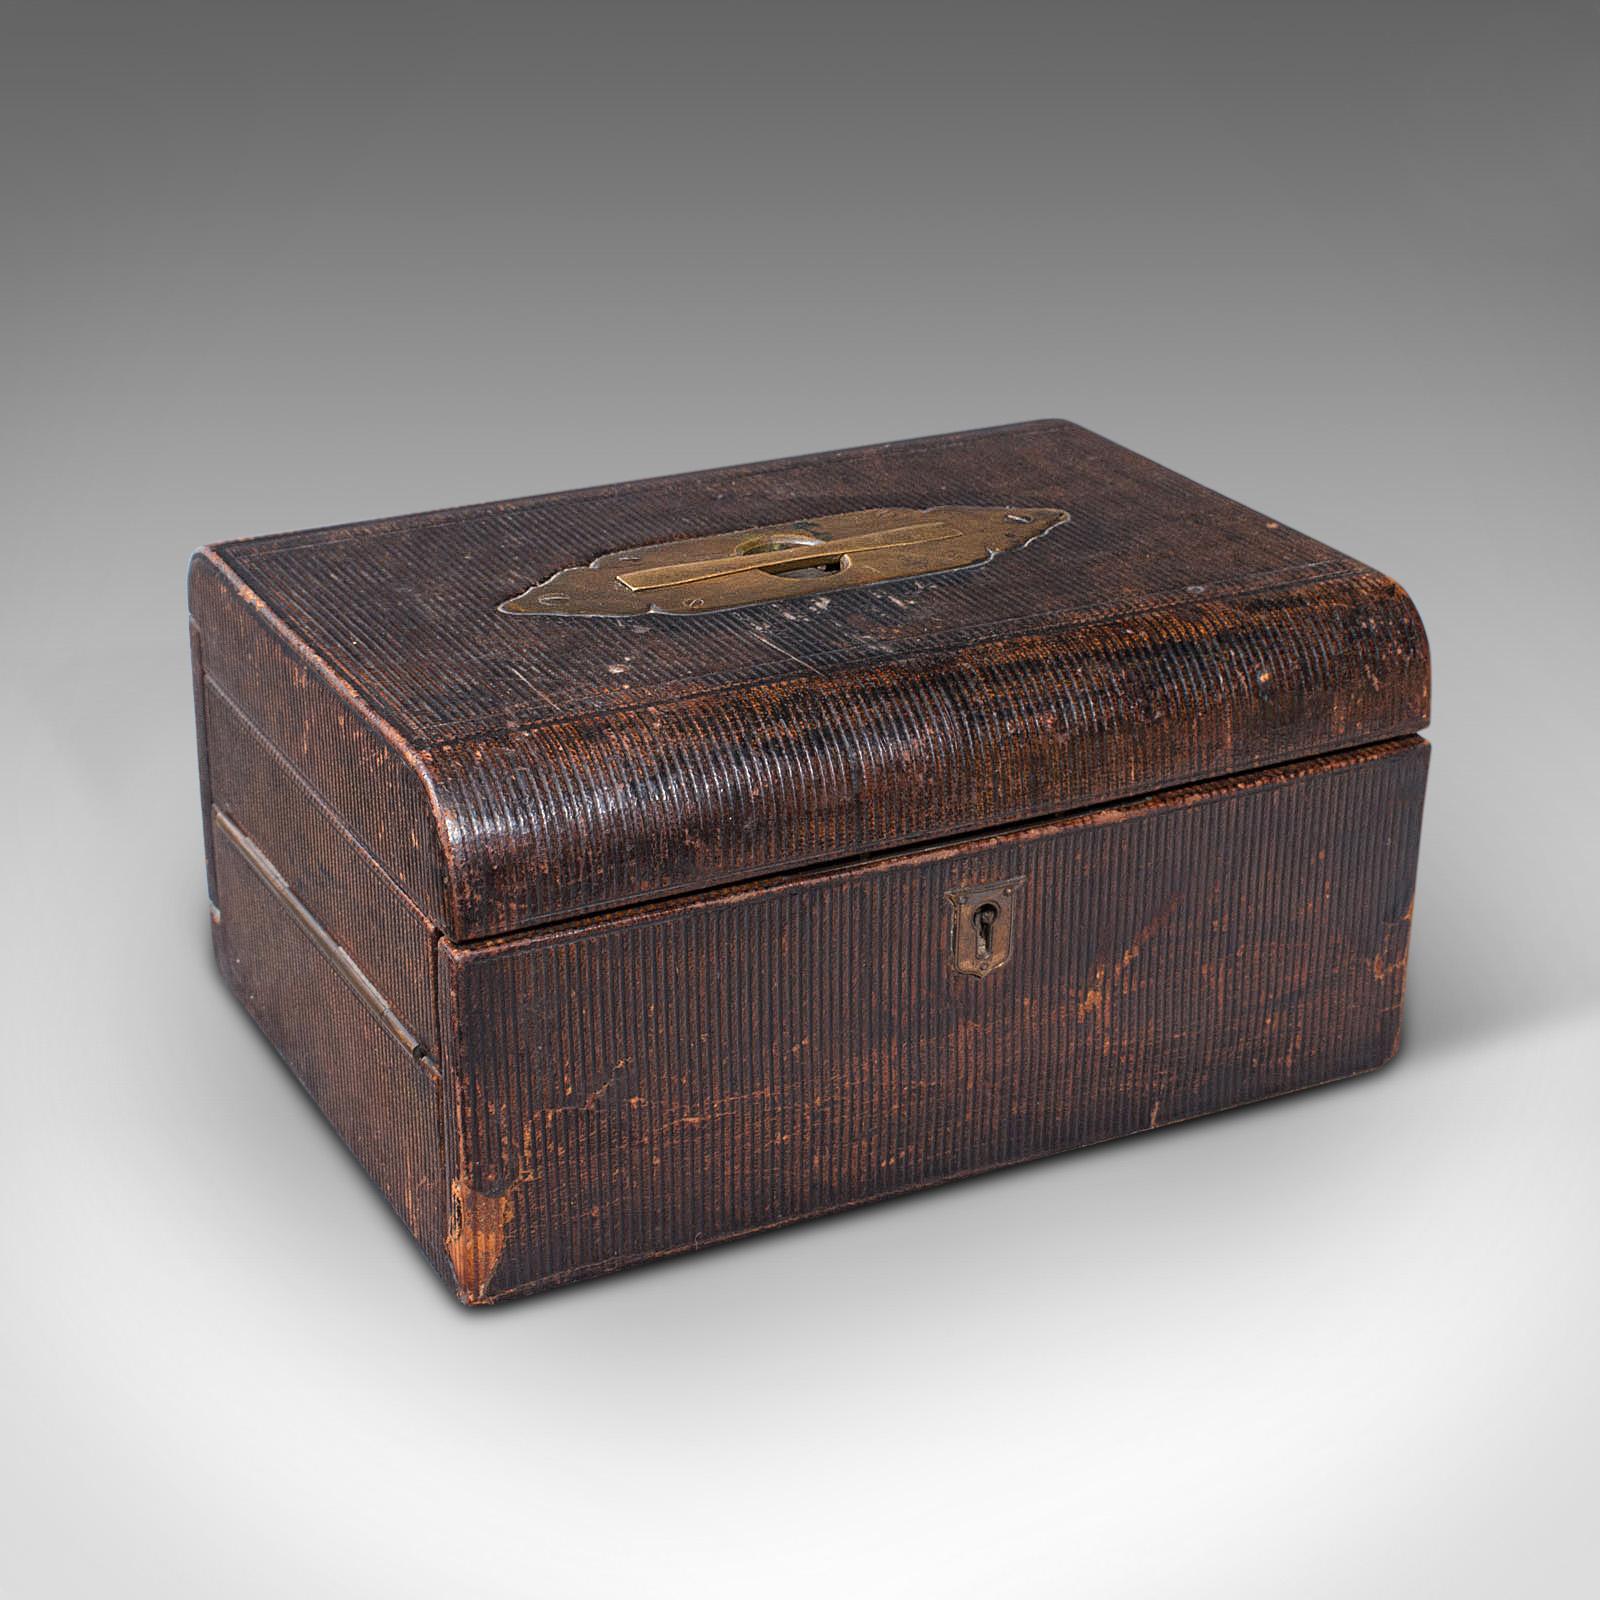 This is an antique travelling vanity box. An English, leather bound campaign correspondence case, dating to the late Victorian period, circa 1880.

Delightfully comprehensive travelling case, with pleasing period finish
Displays a desirable aged